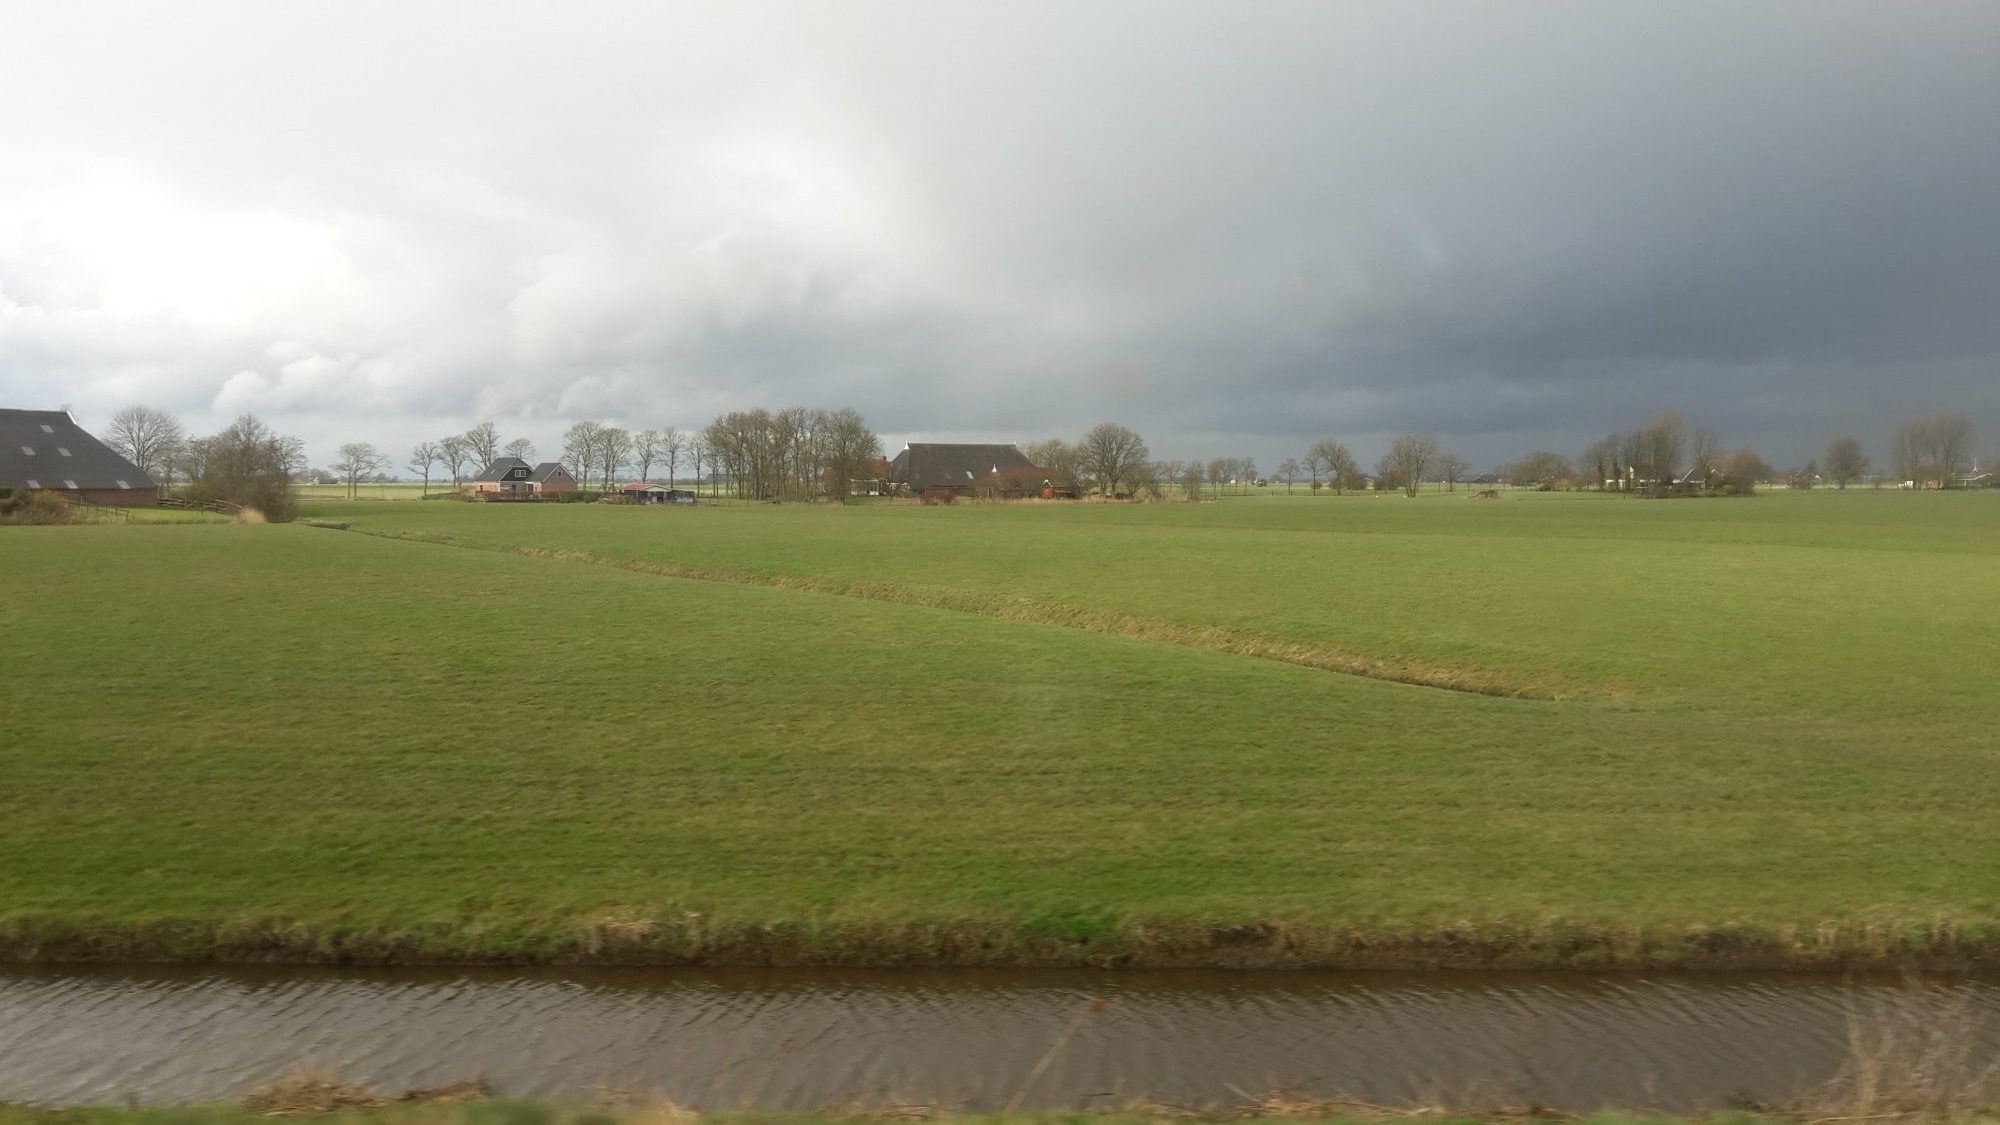 a rainy day somewhere on my commute between Groningen and Leeuwarden. Notice that fields are not delineated by fences, but rather by water-filled ditches.